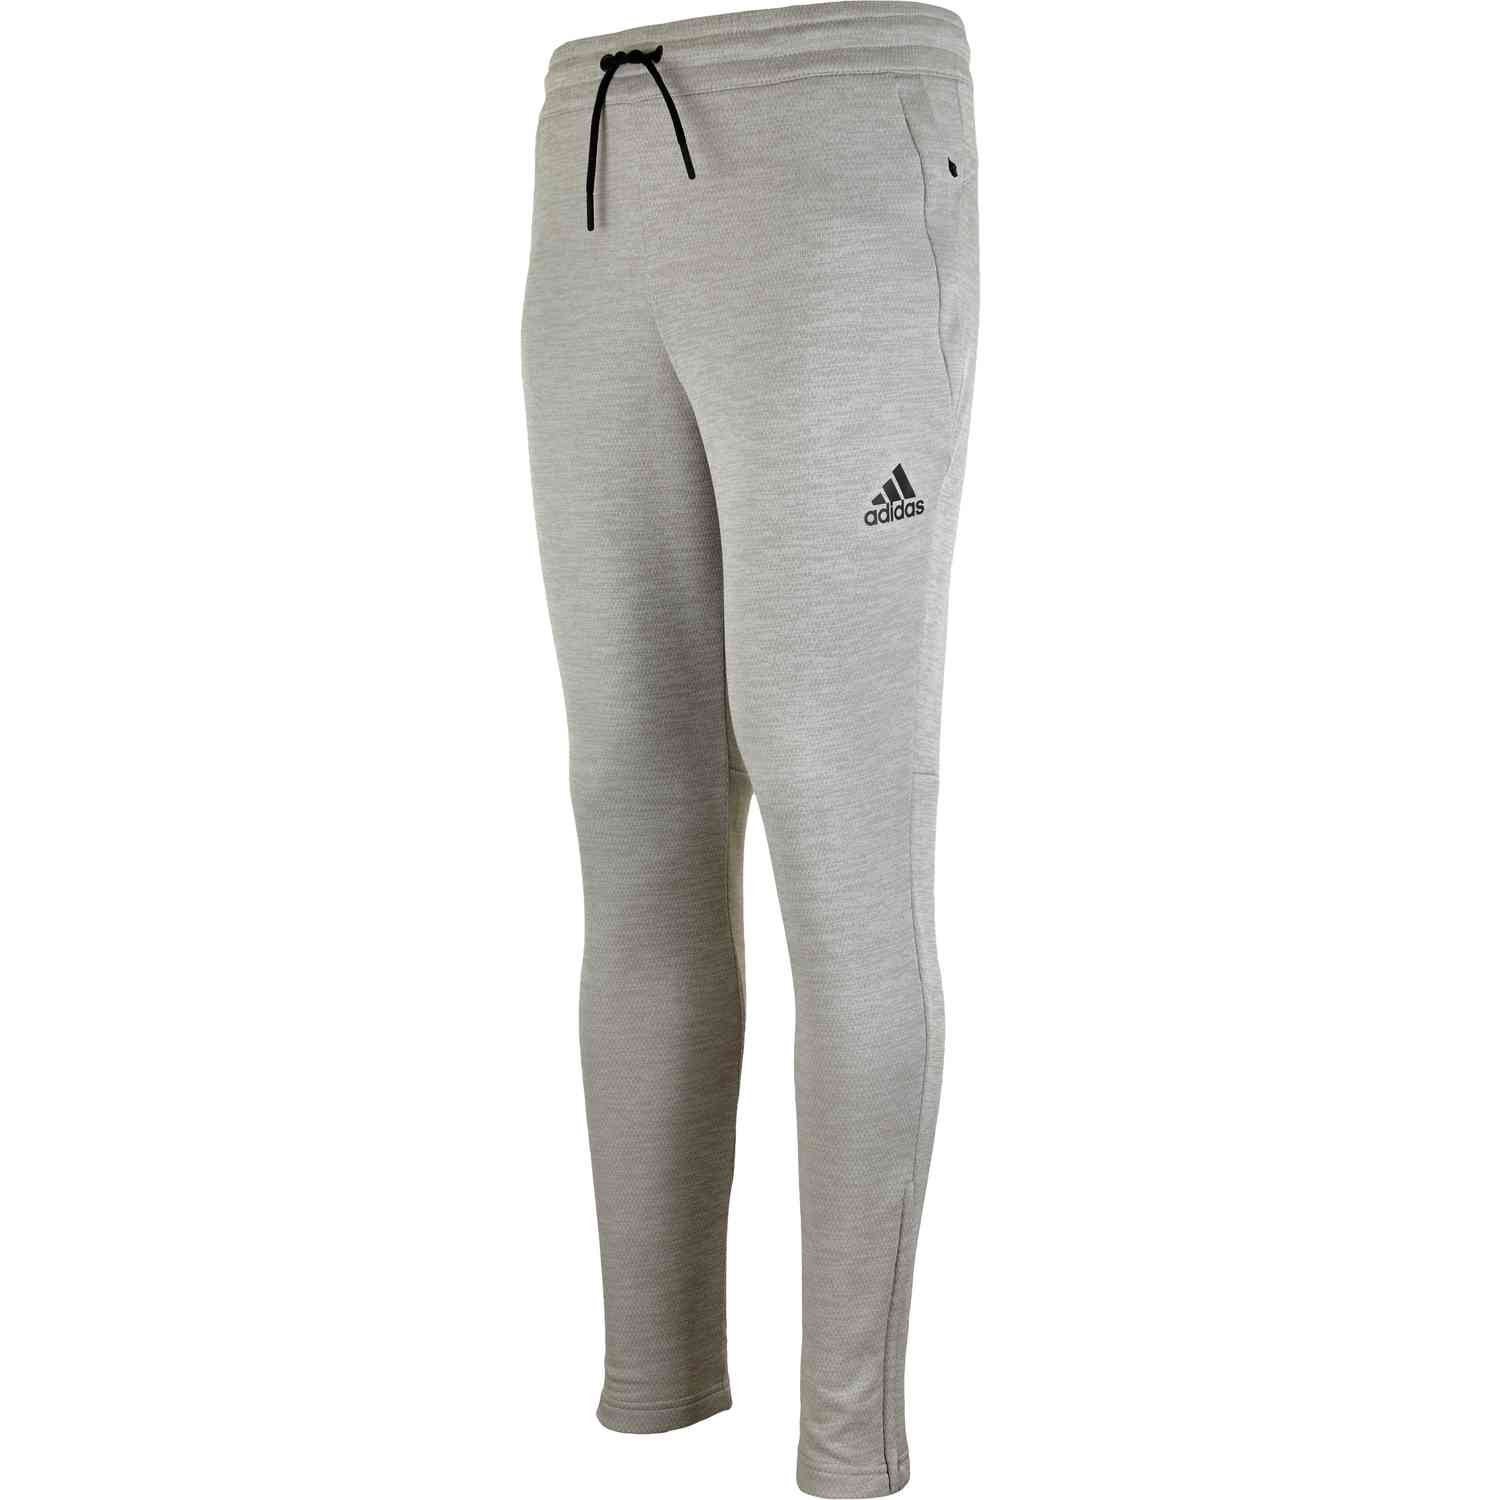 Men's Athletic & Lifestyle Pants in Gray